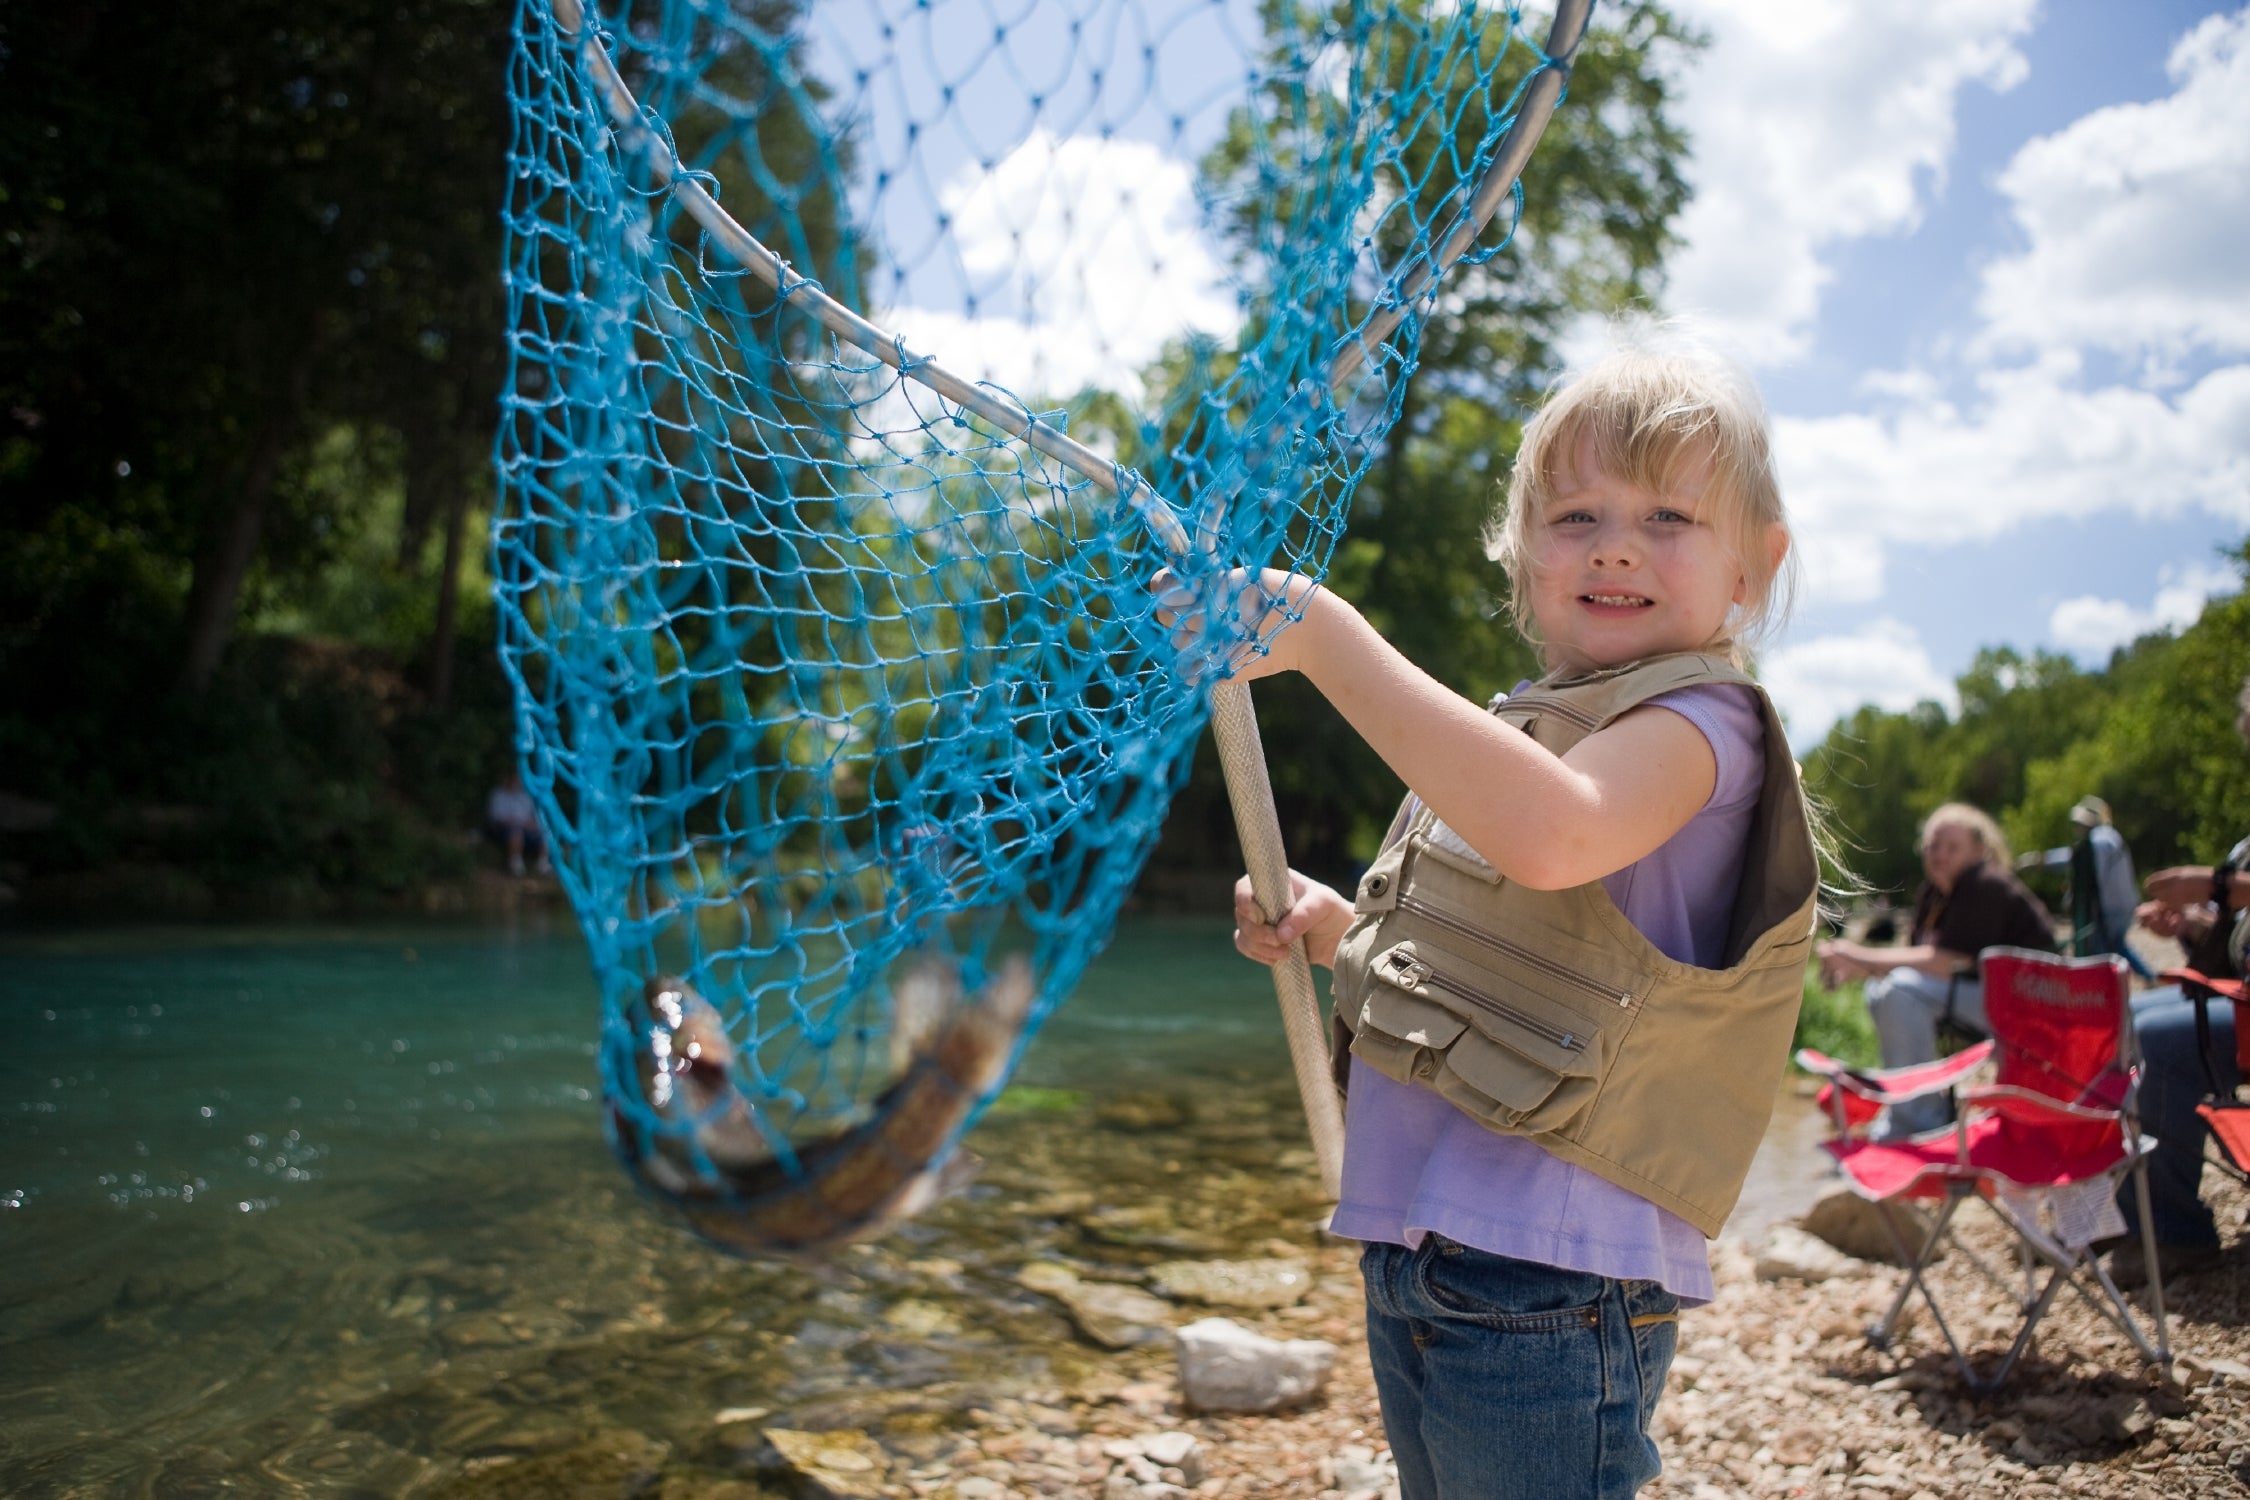 Child Fishing with Fish In Net